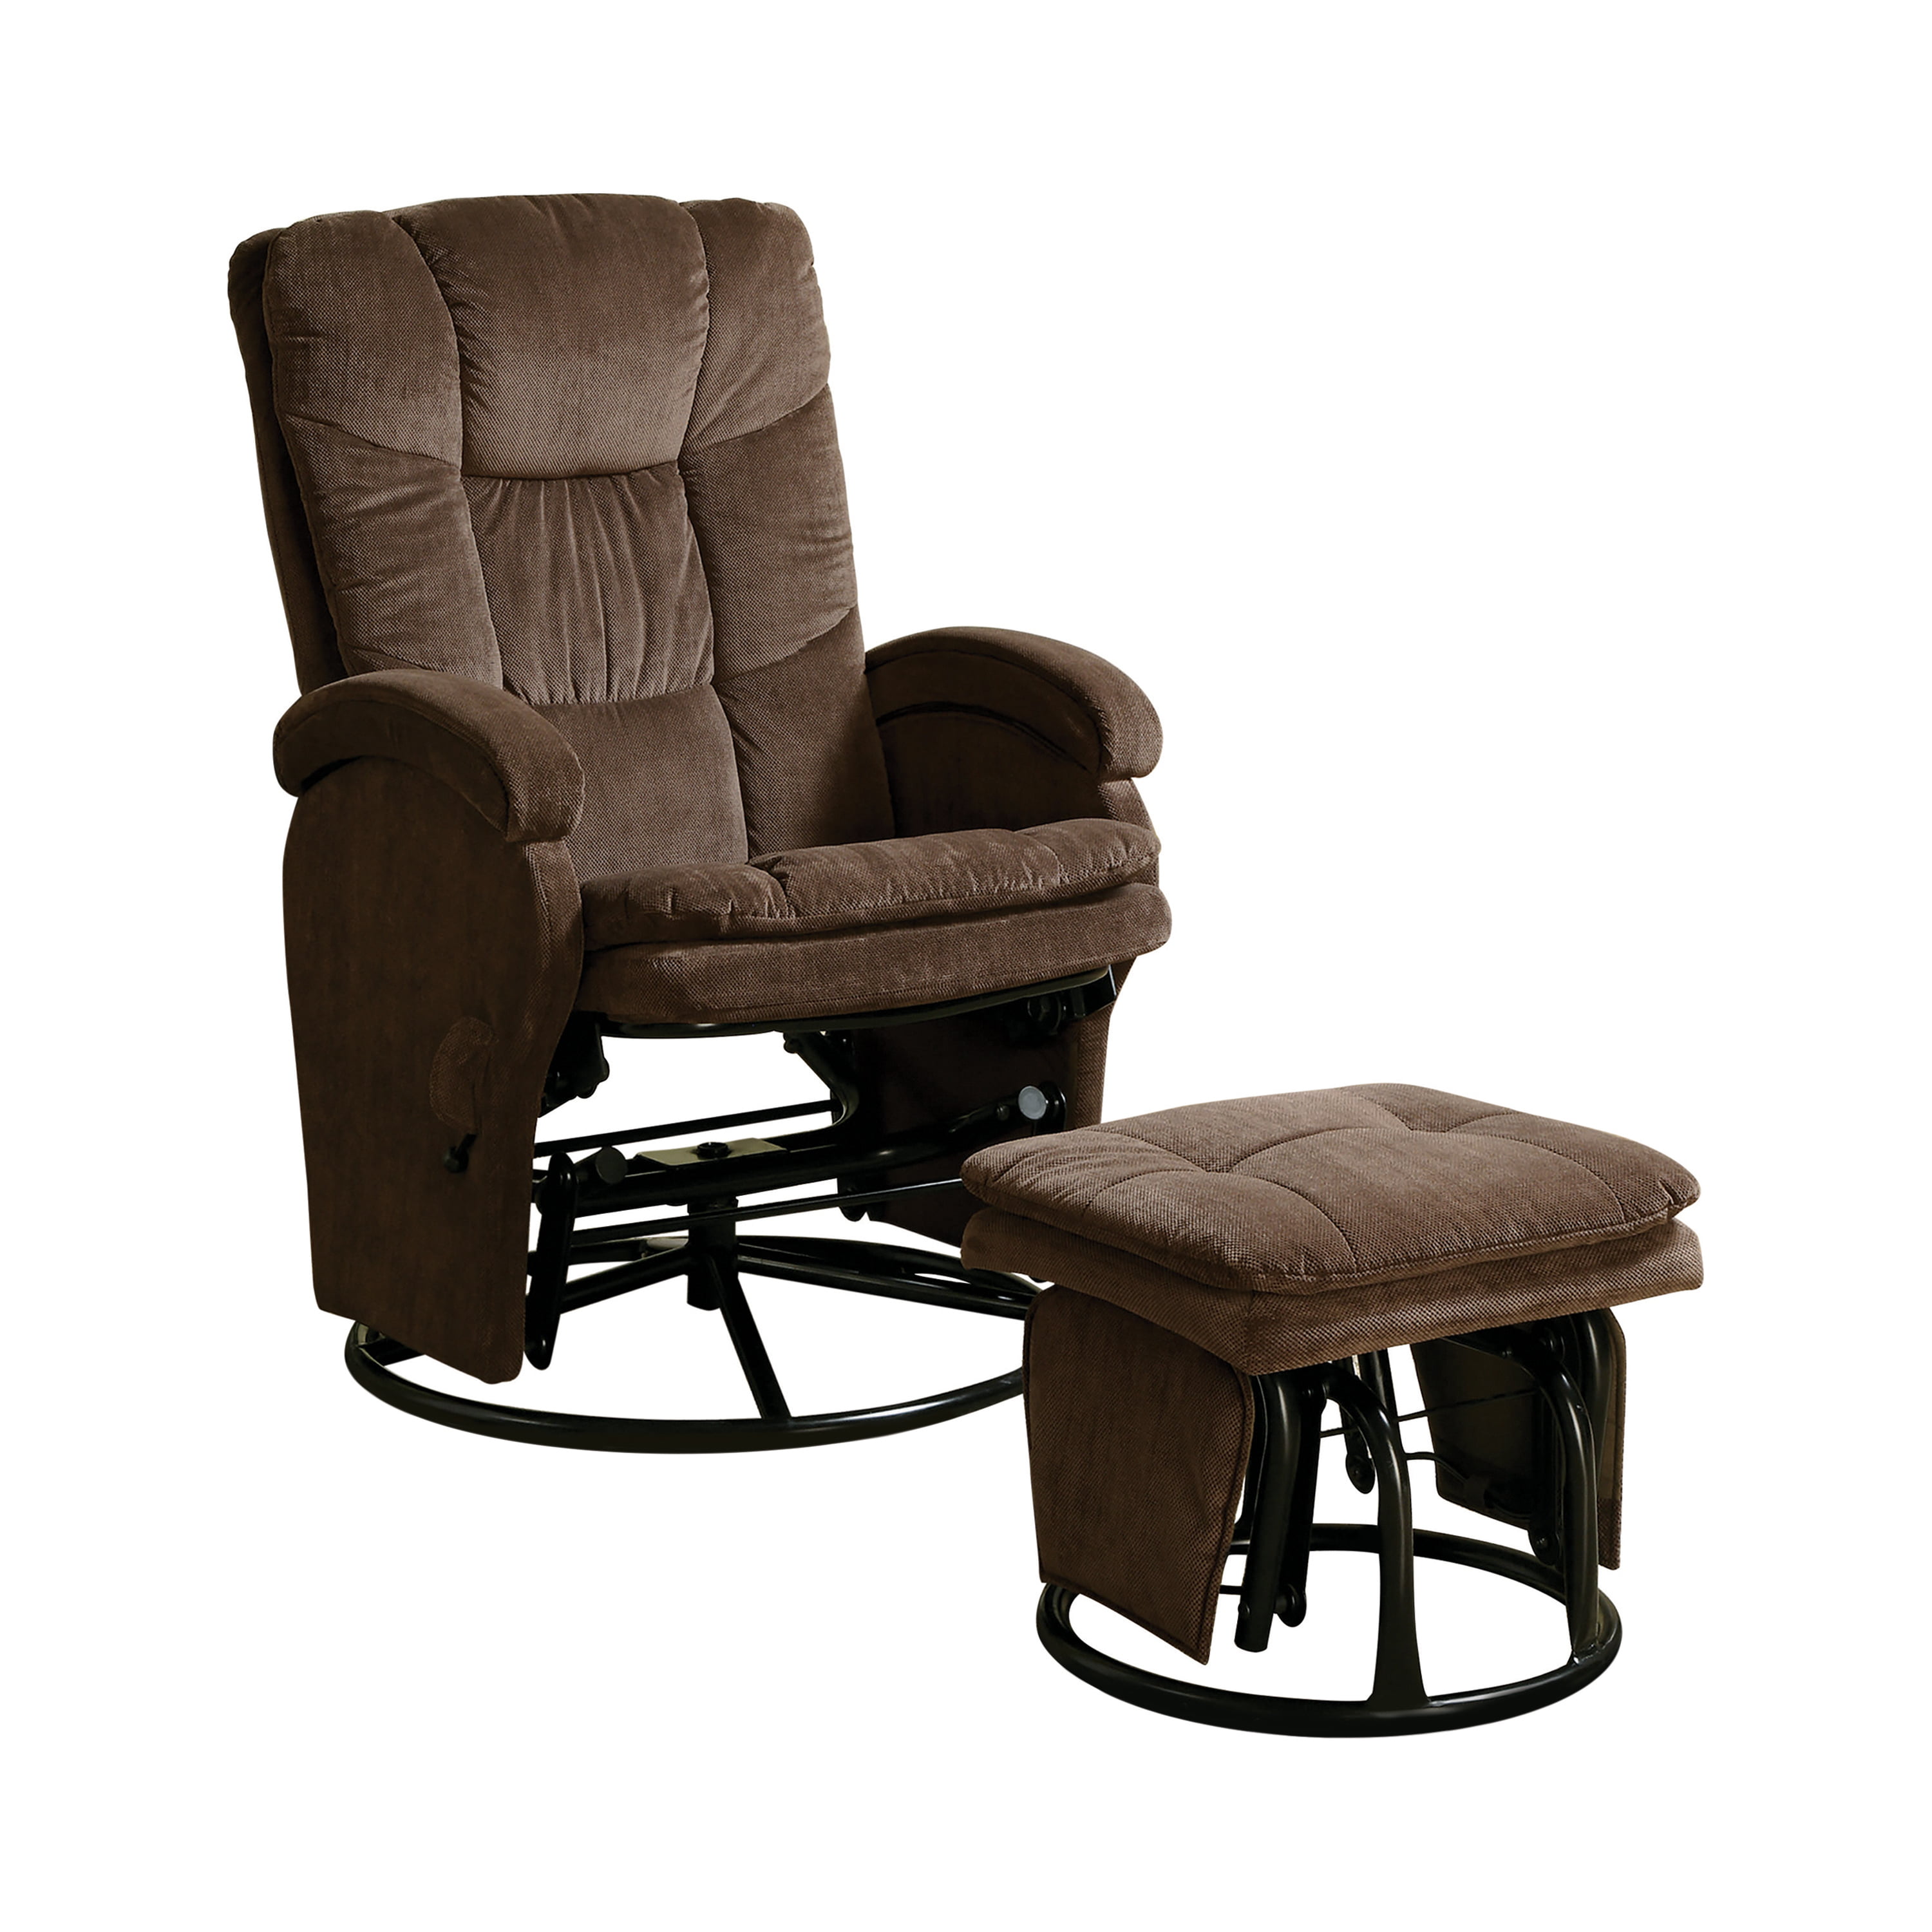 Swivel Glider Recliner With Ottoman, Black Leather Rocking Chair With Ottoman